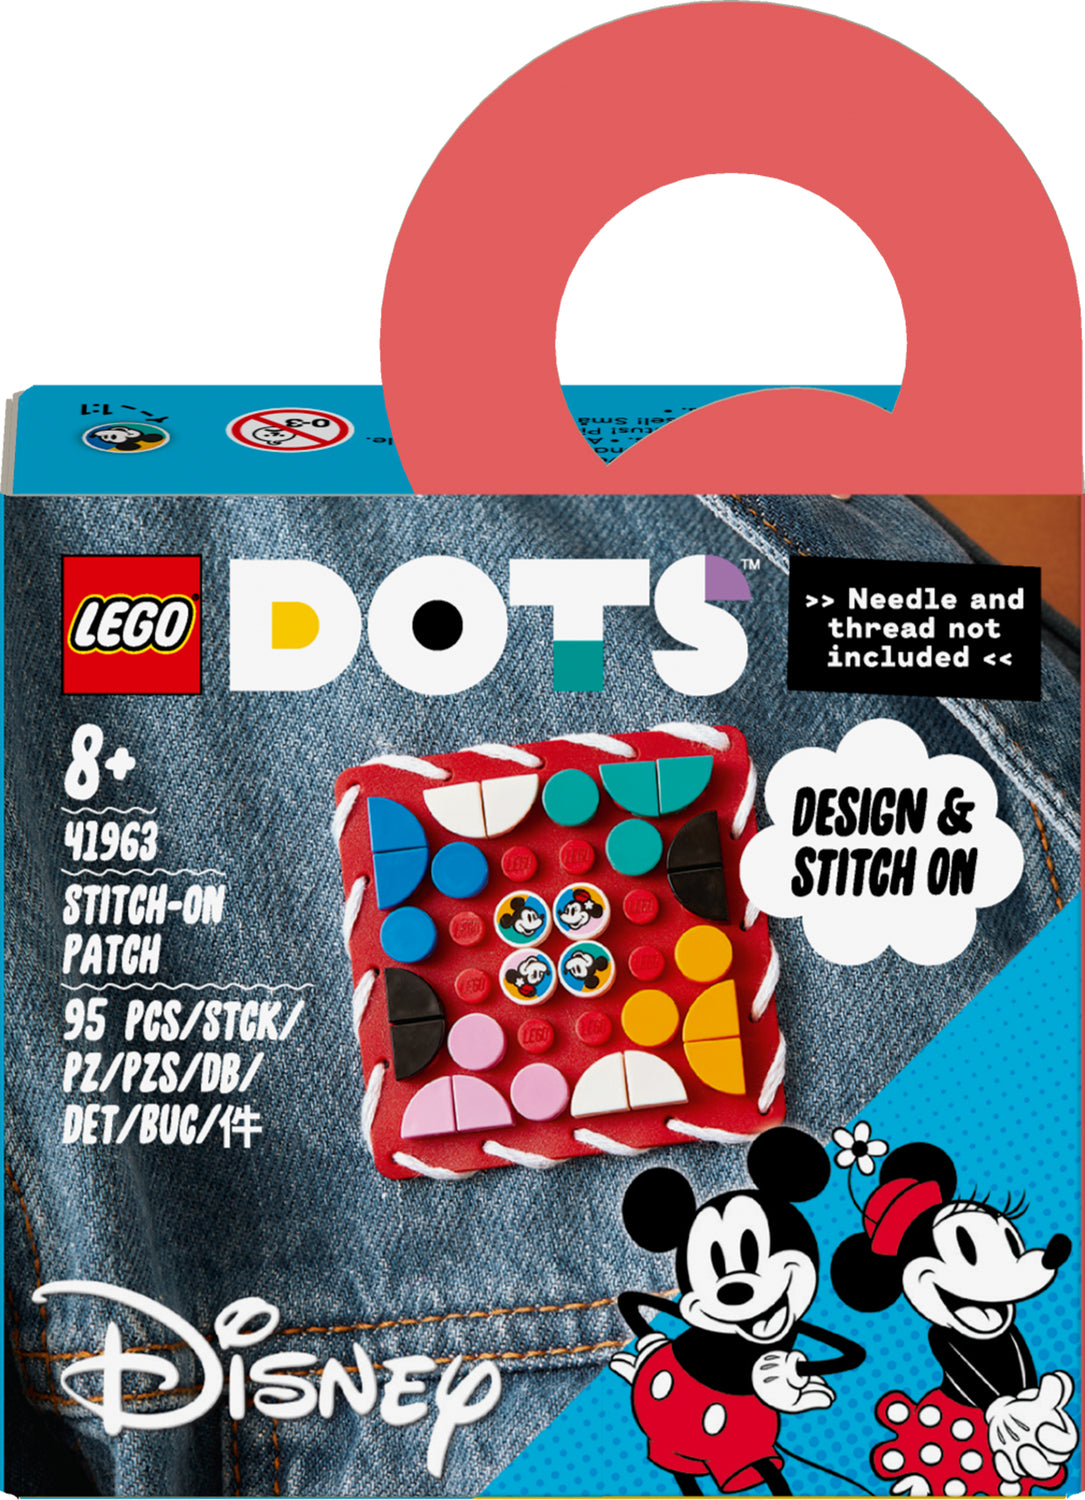 LEGO - 41963 - DOTS - Mickey Mouse & Minnie Mouse Stitch-on Patch